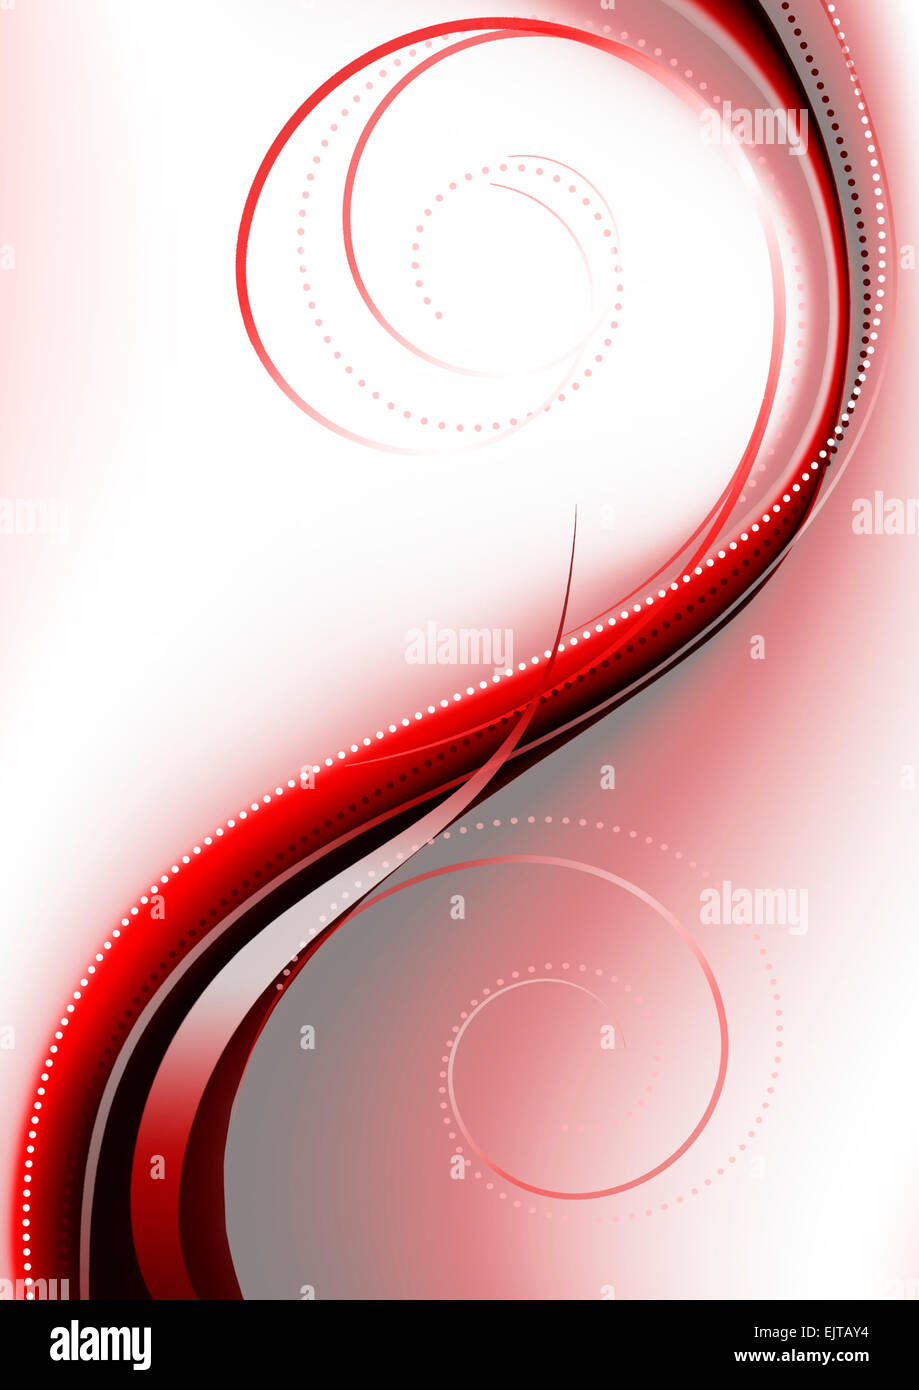 Bright red curve covered curlicues,beads and curved lines on a pink  background Stock Photo - Alamy